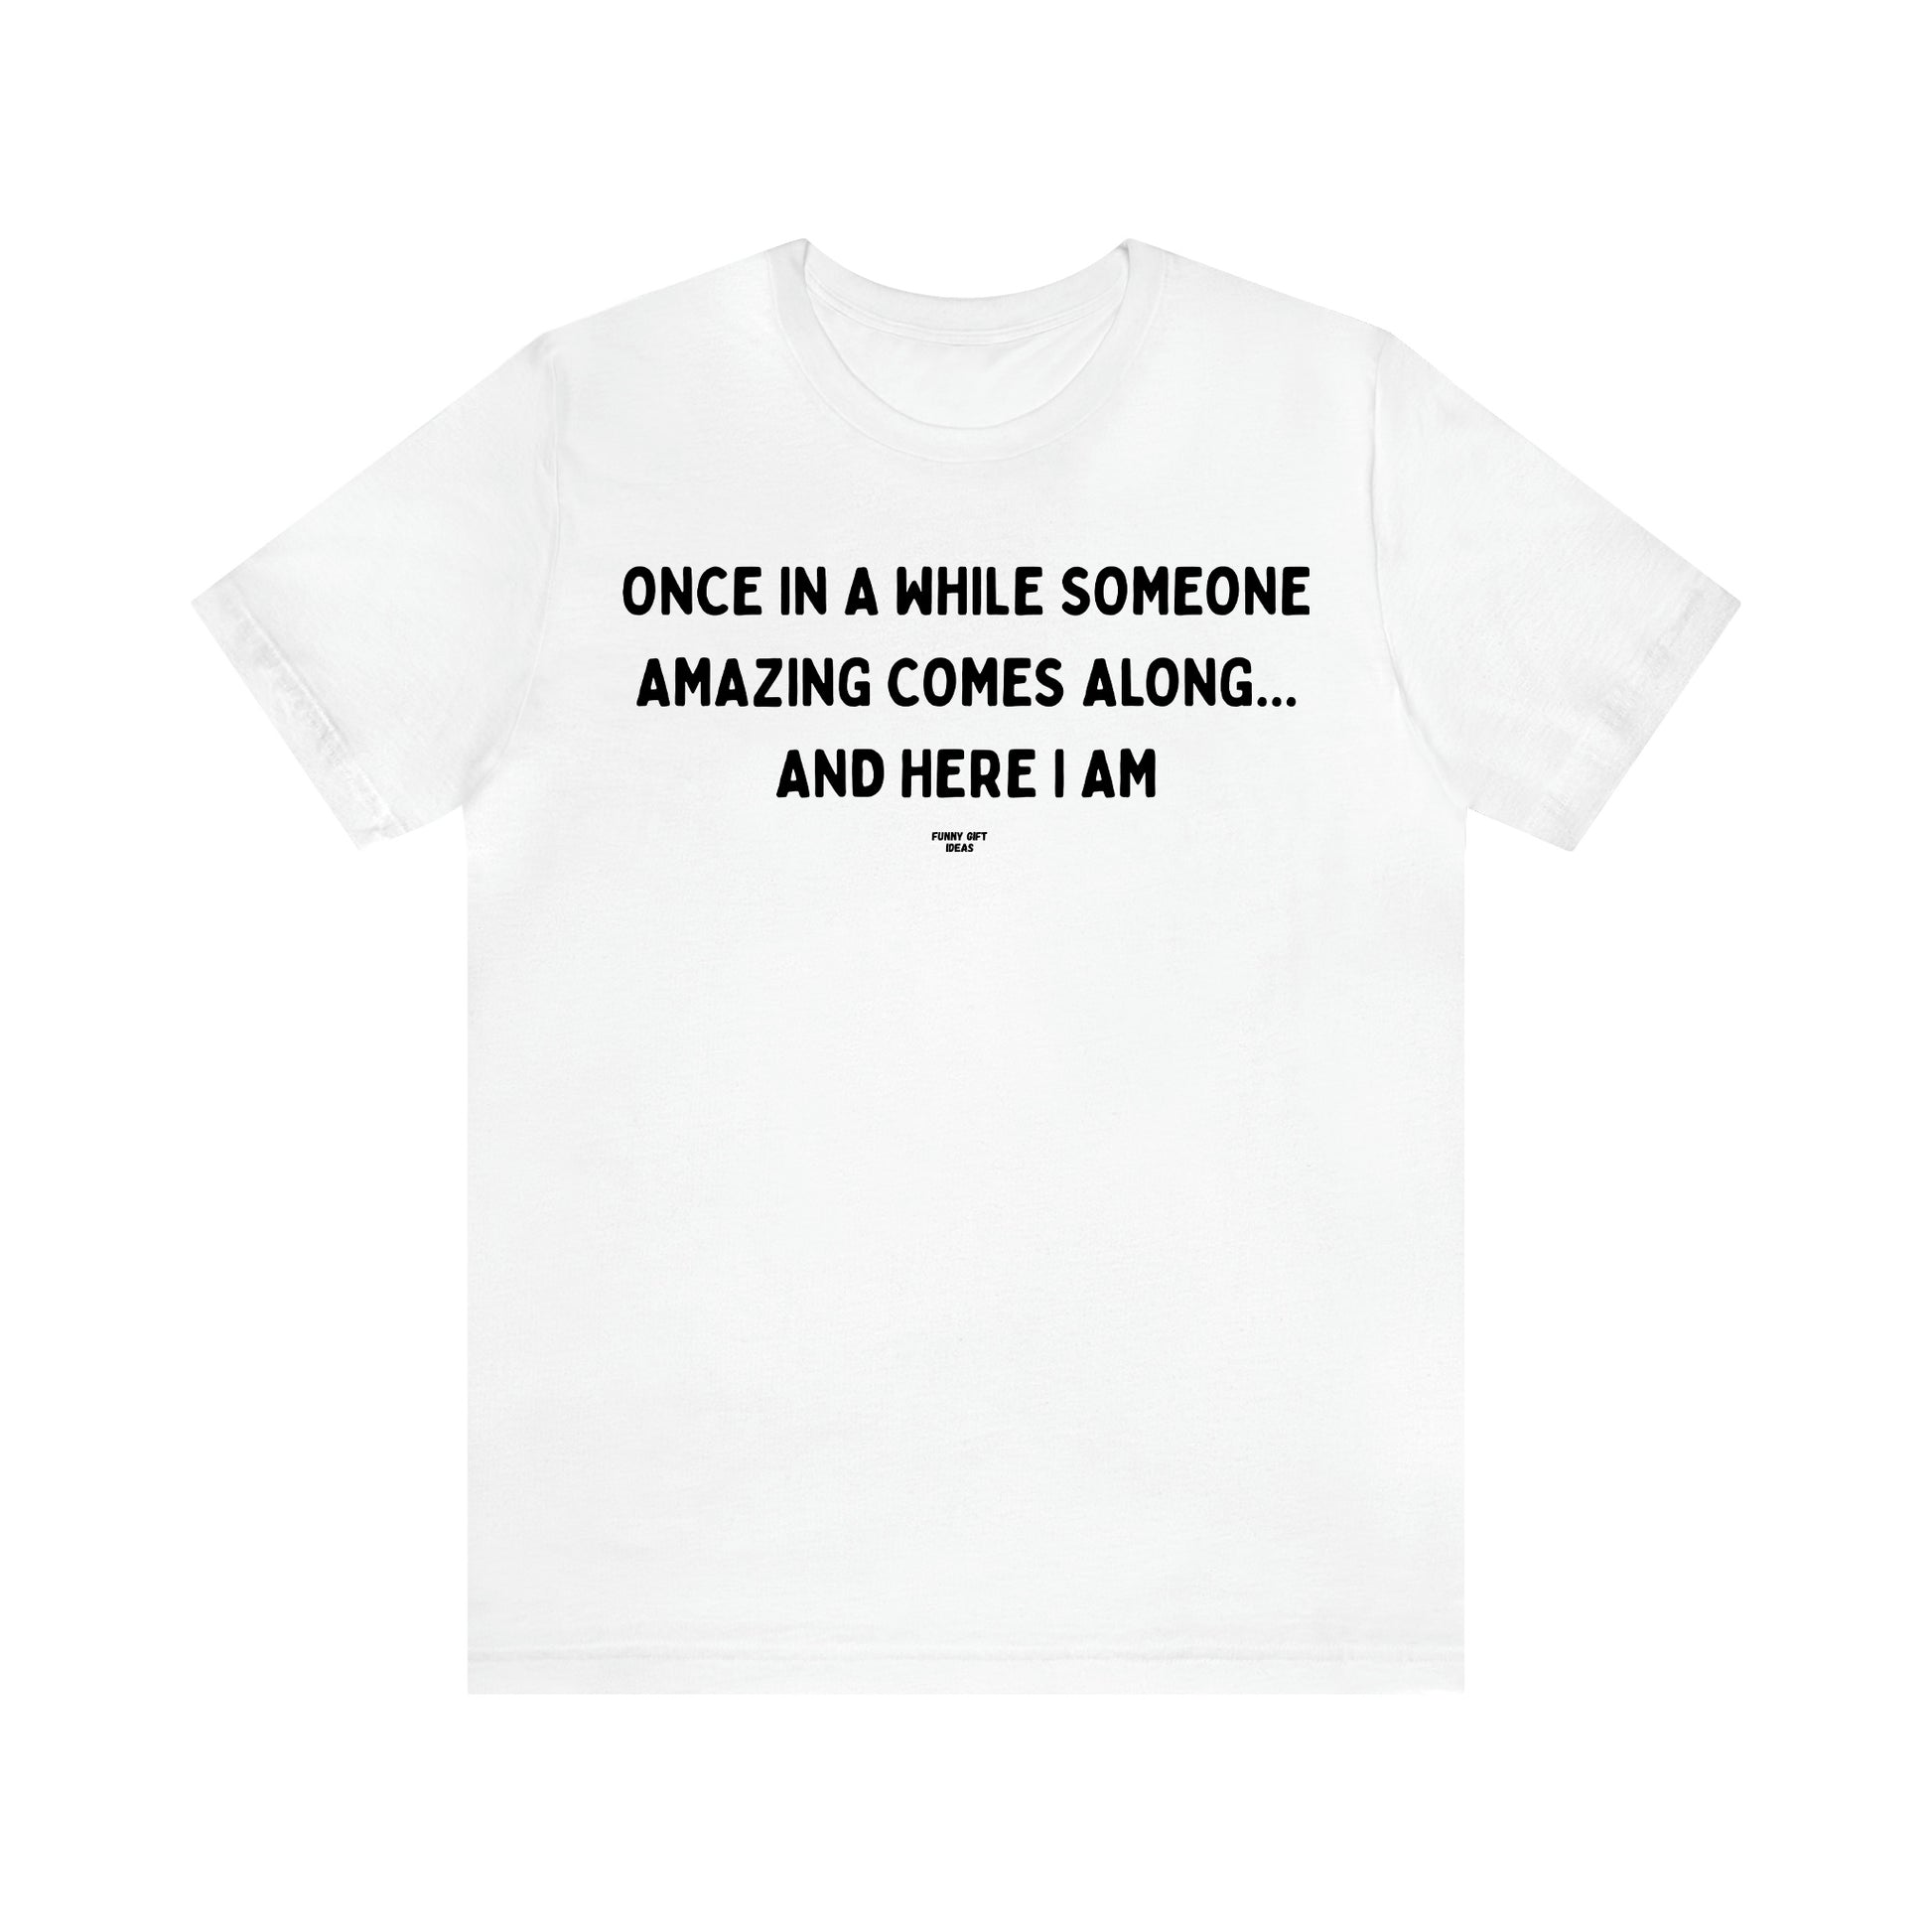 Men's T Shirts Once in a While Someone Amazing Comes Along.. And Here I Am - Funny Gift Ideas